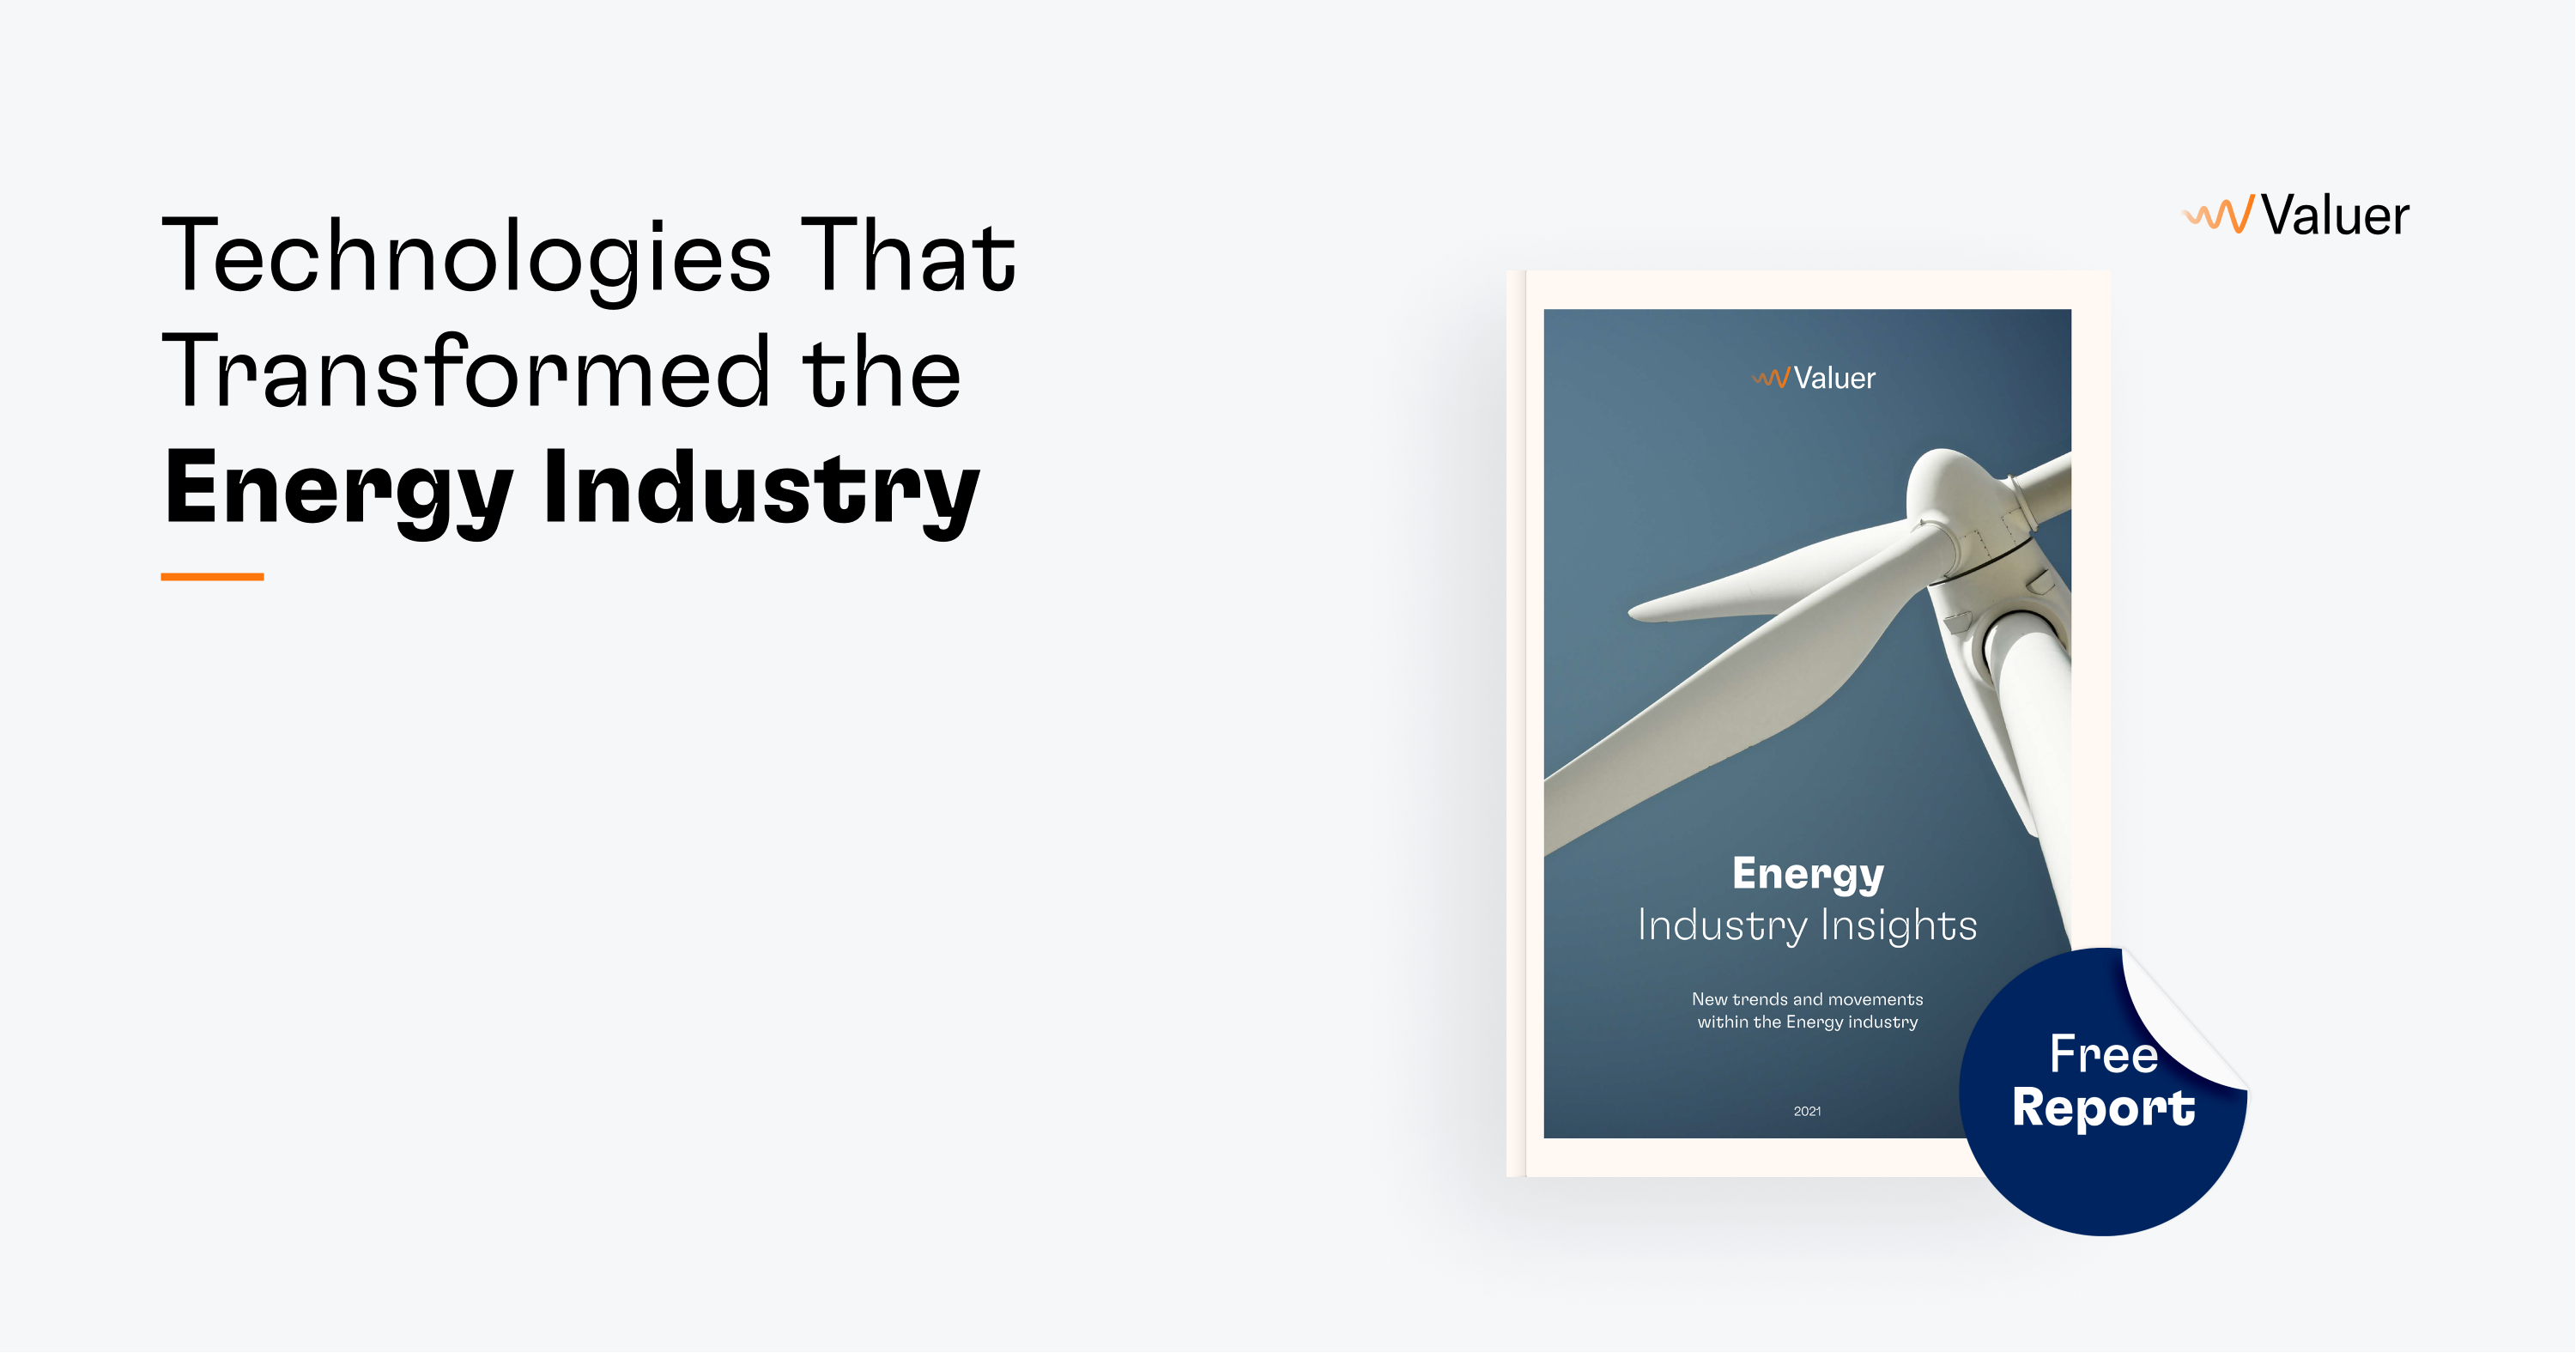 Technologies That Transformed the Energy Industry